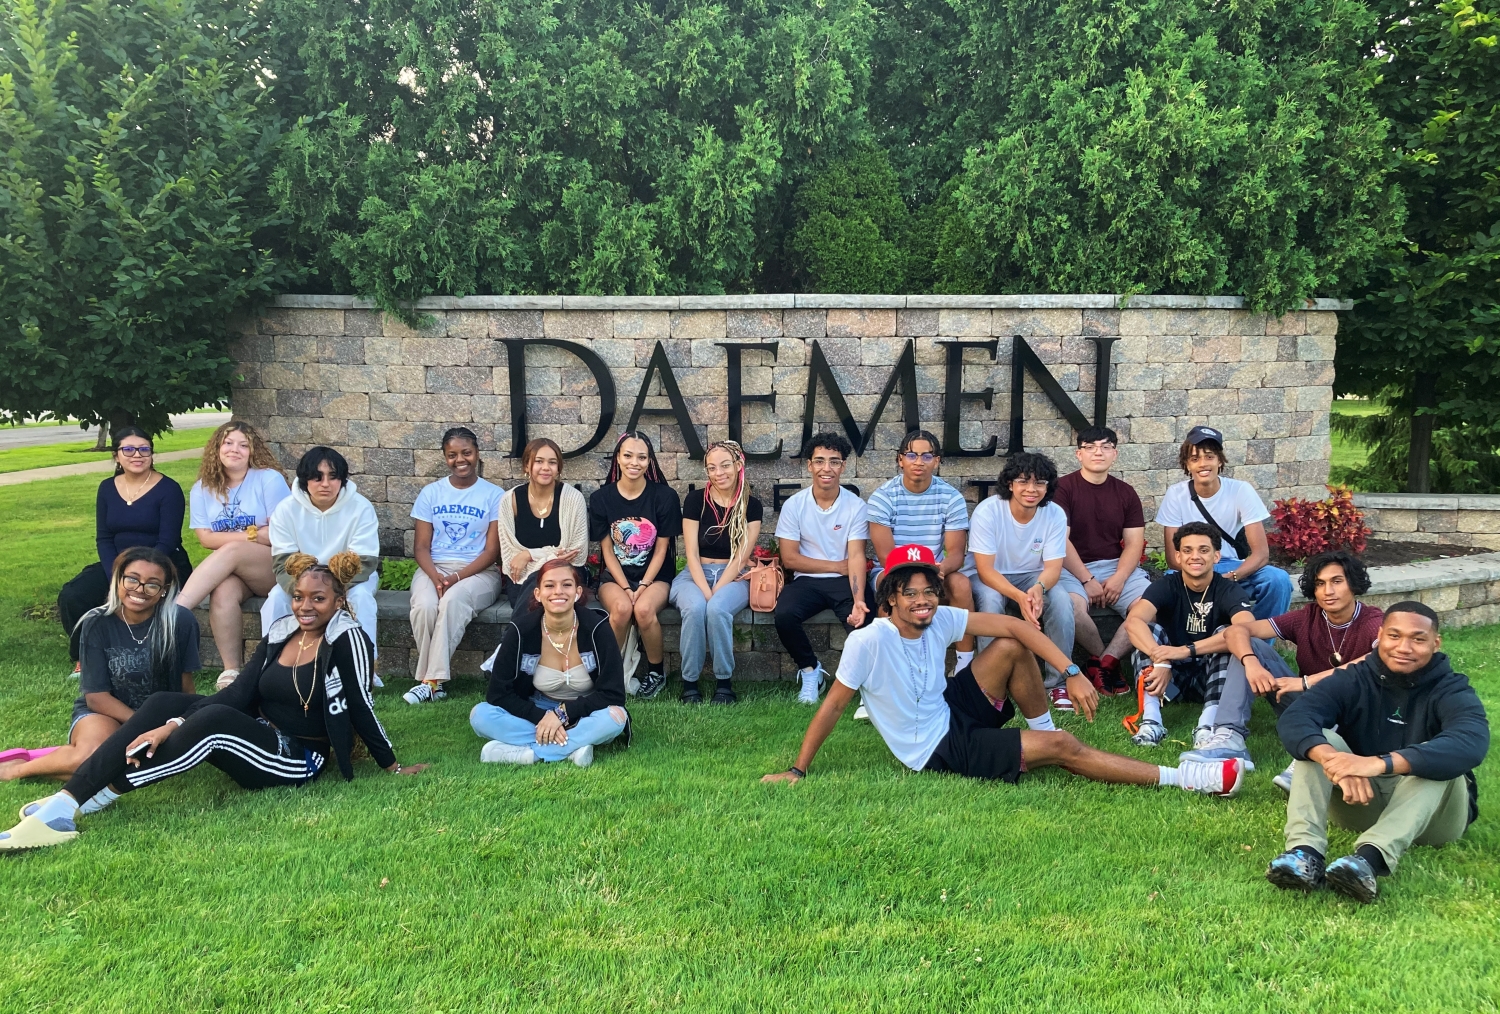 TRI Scholars posing in front of the Daemen sign on Main Street